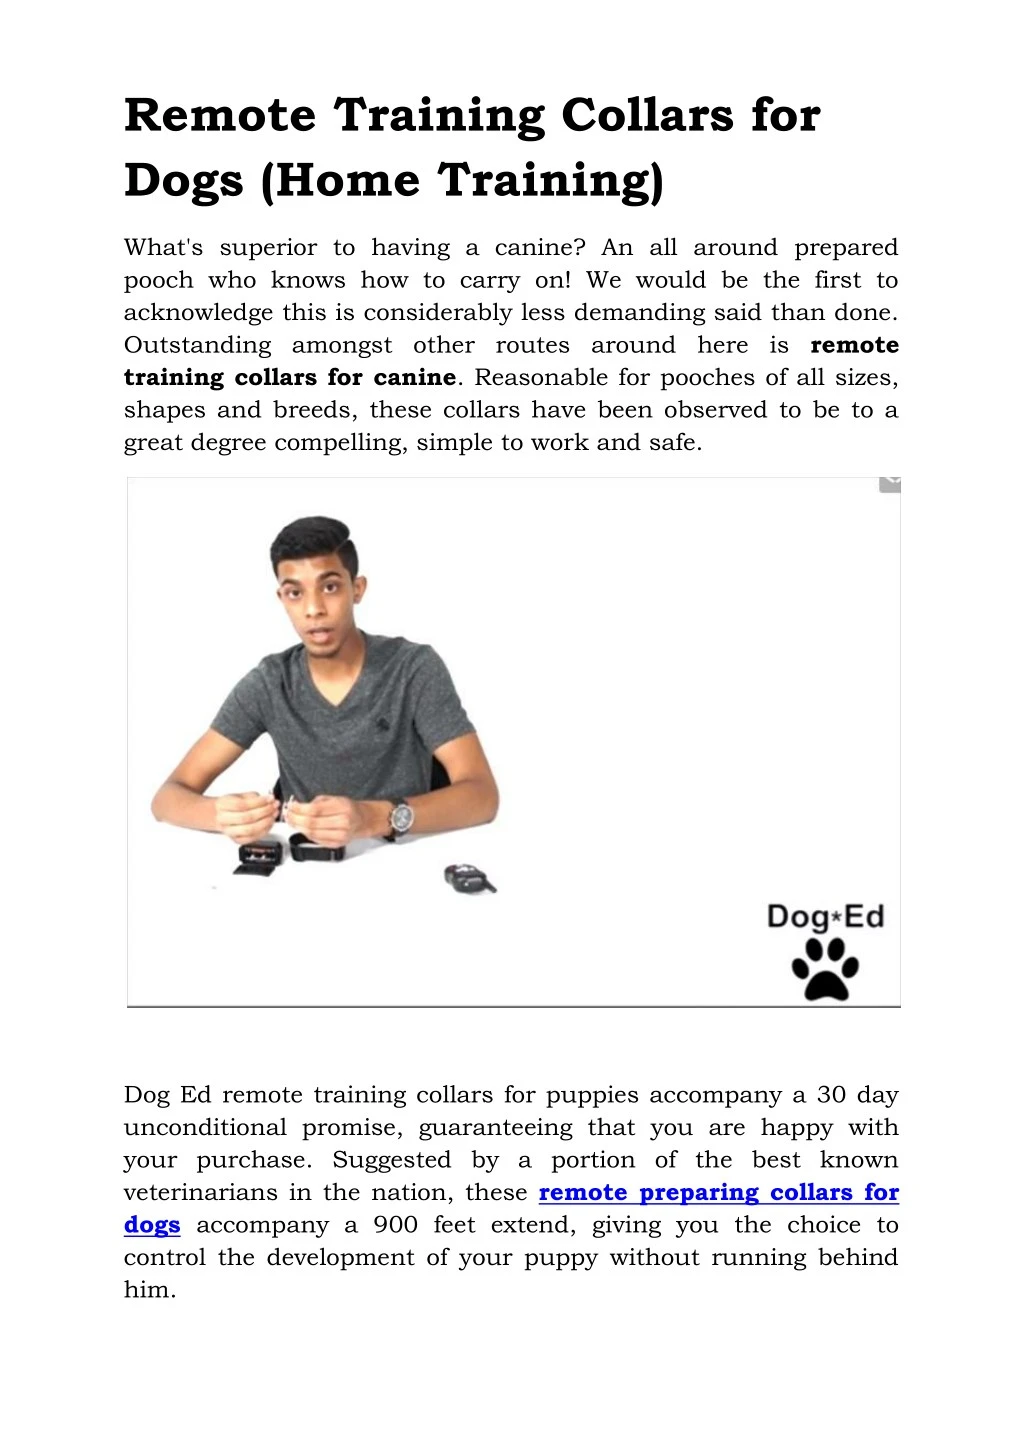 remote training collars for dogs home training